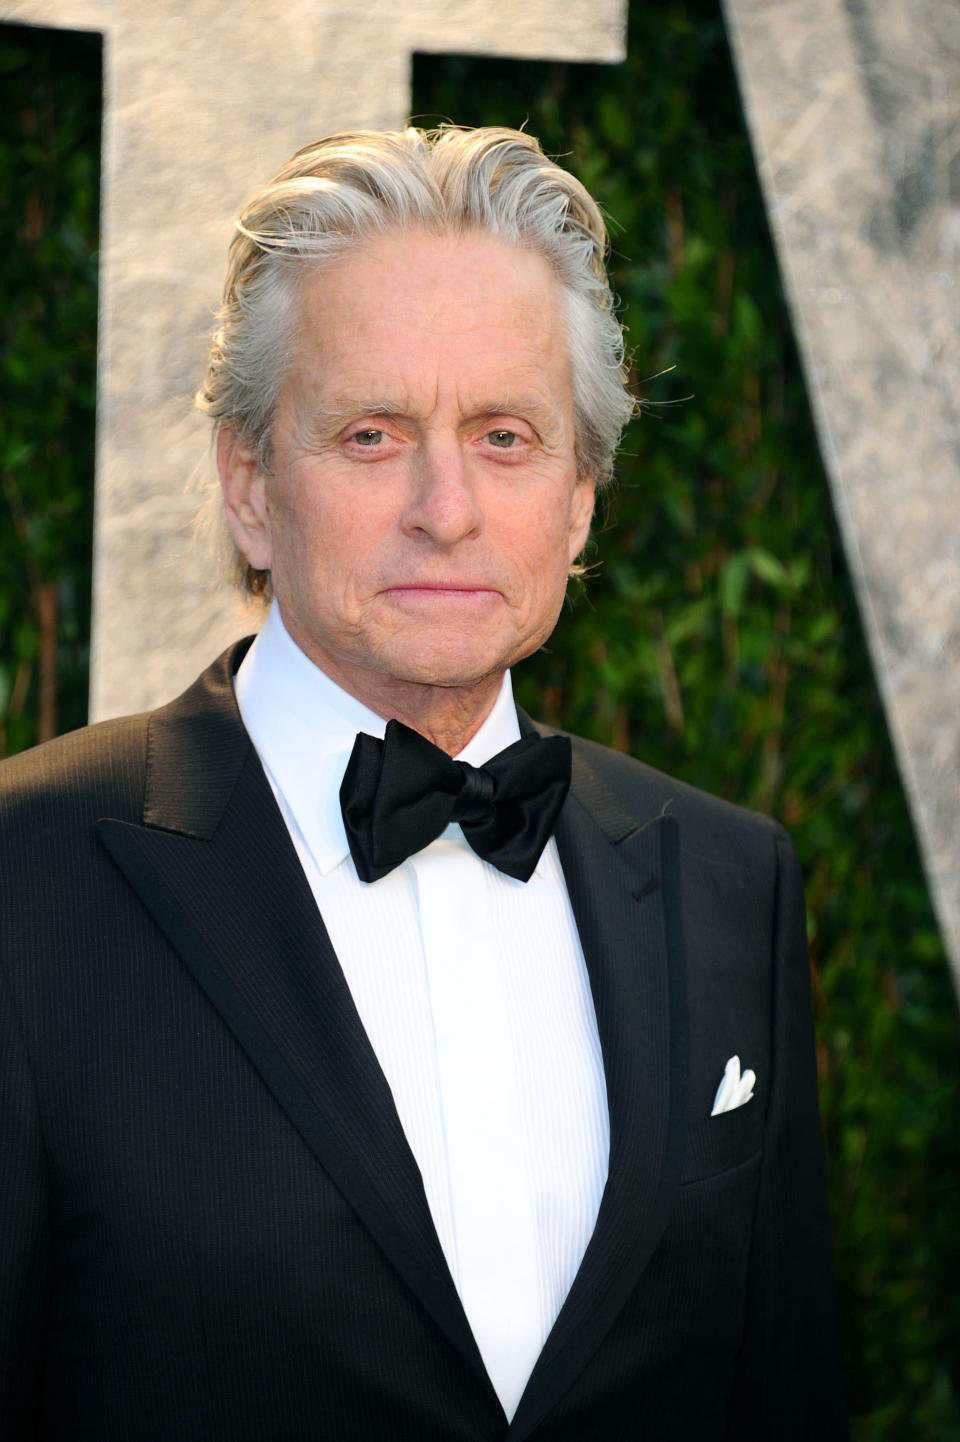 Actor Michael Douglas arrives at the 2012 Vanity Fair Oscar Party hosted by Graydon Carter at Sunset Tower on February 26, 2012 in West Hollywood, California. (Photo by Alberto E. Rodriguez/Getty Images)